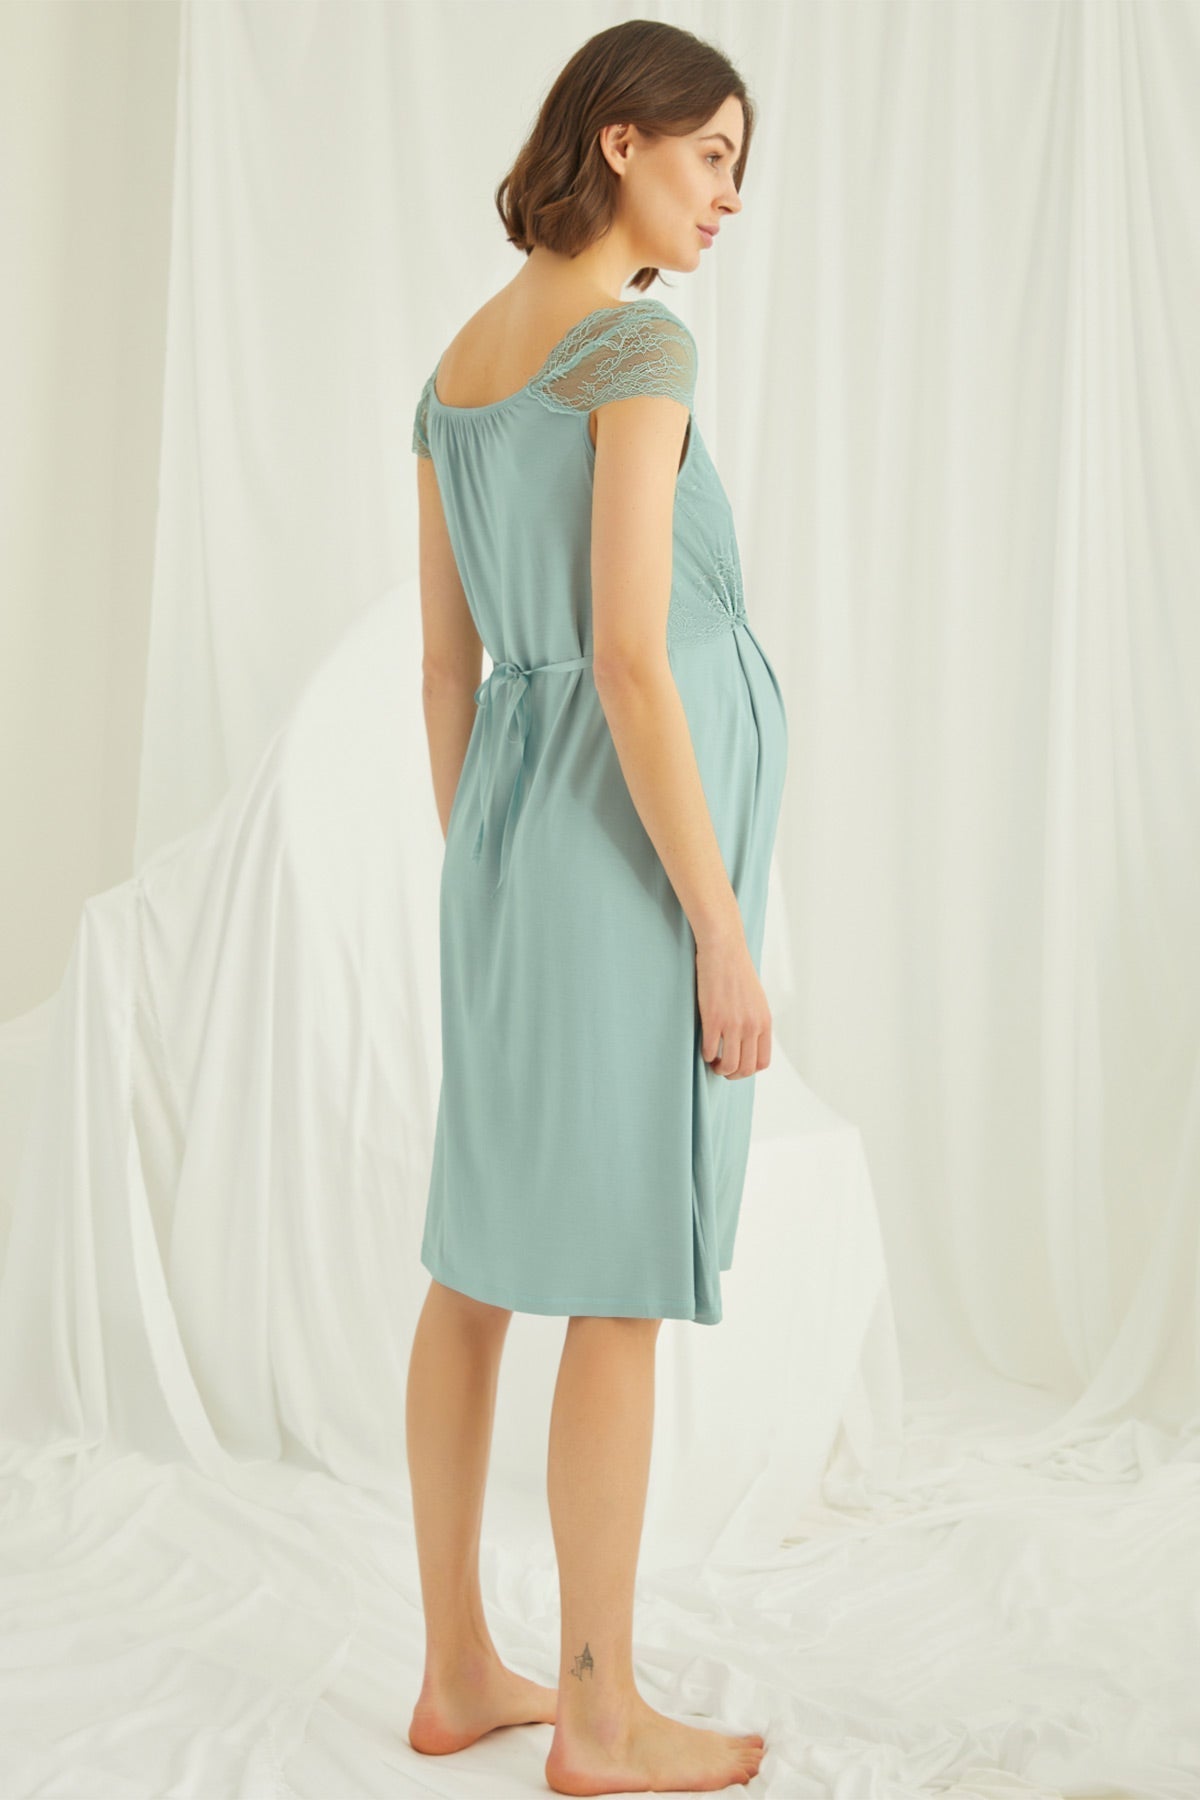 Lace Maternity & Nursing Nightgown With Robe Set Green - 18467